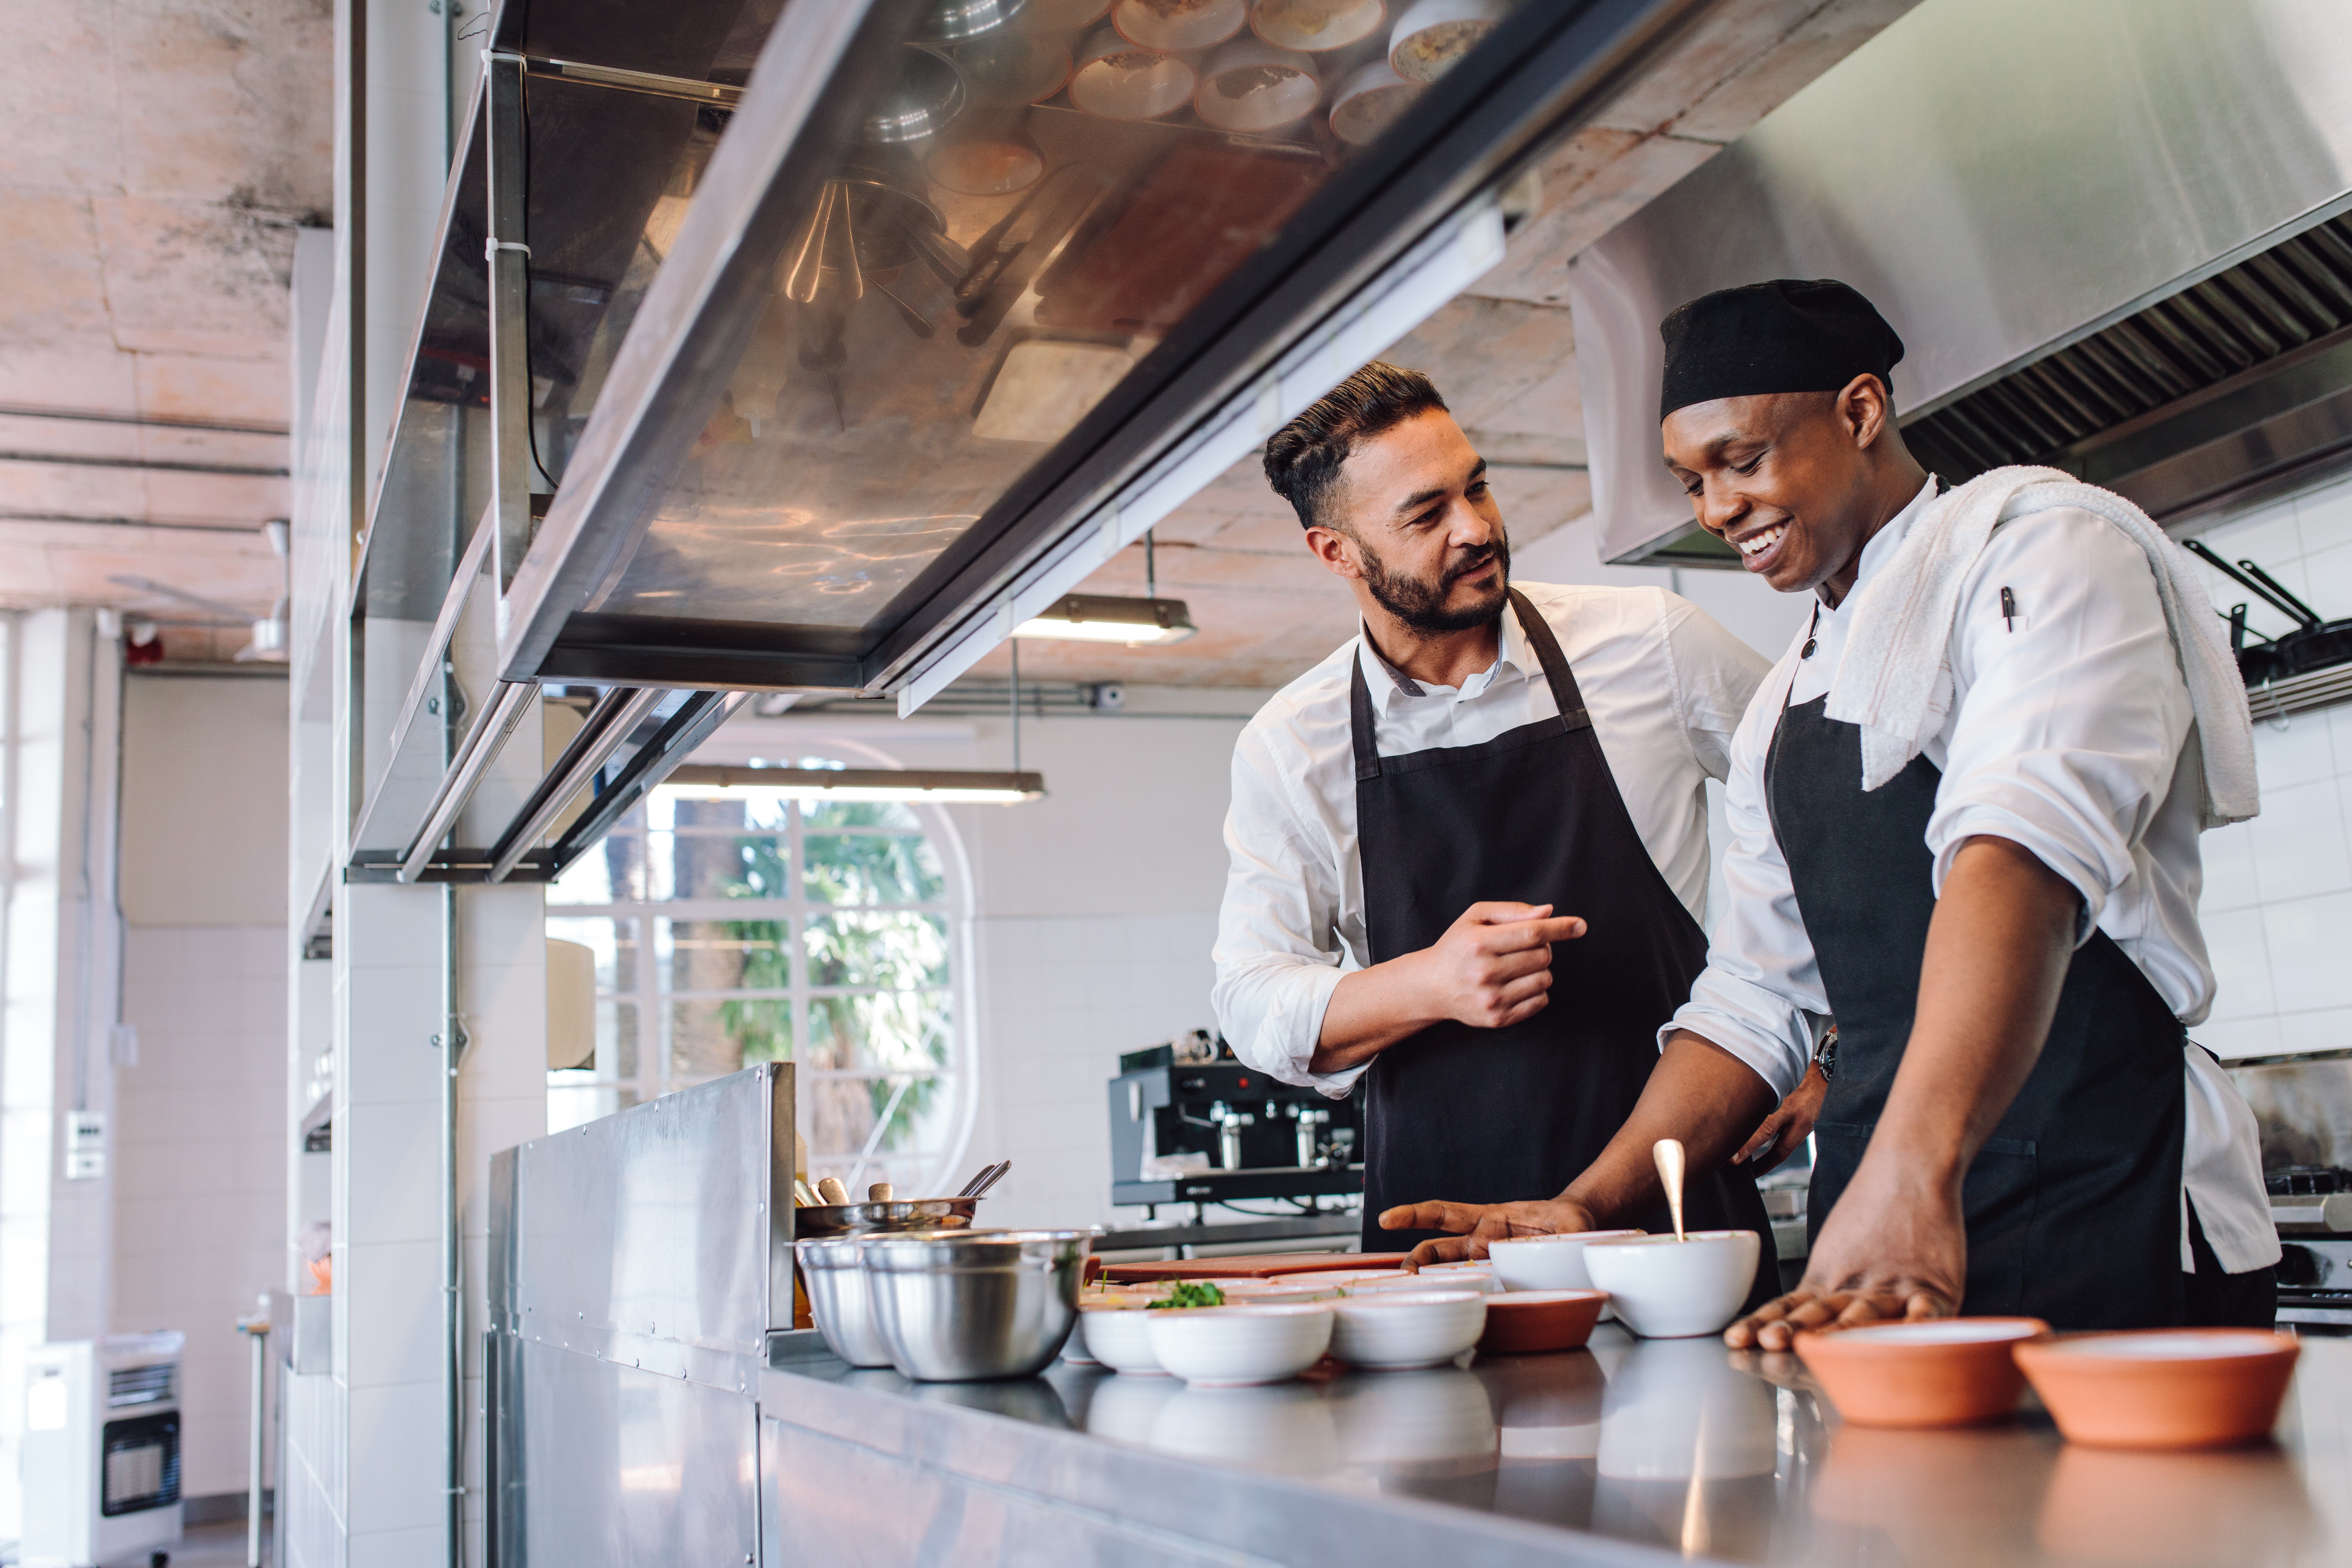 Image of Are you considering working in the restaurant industry? If so, here are a few things you should know.